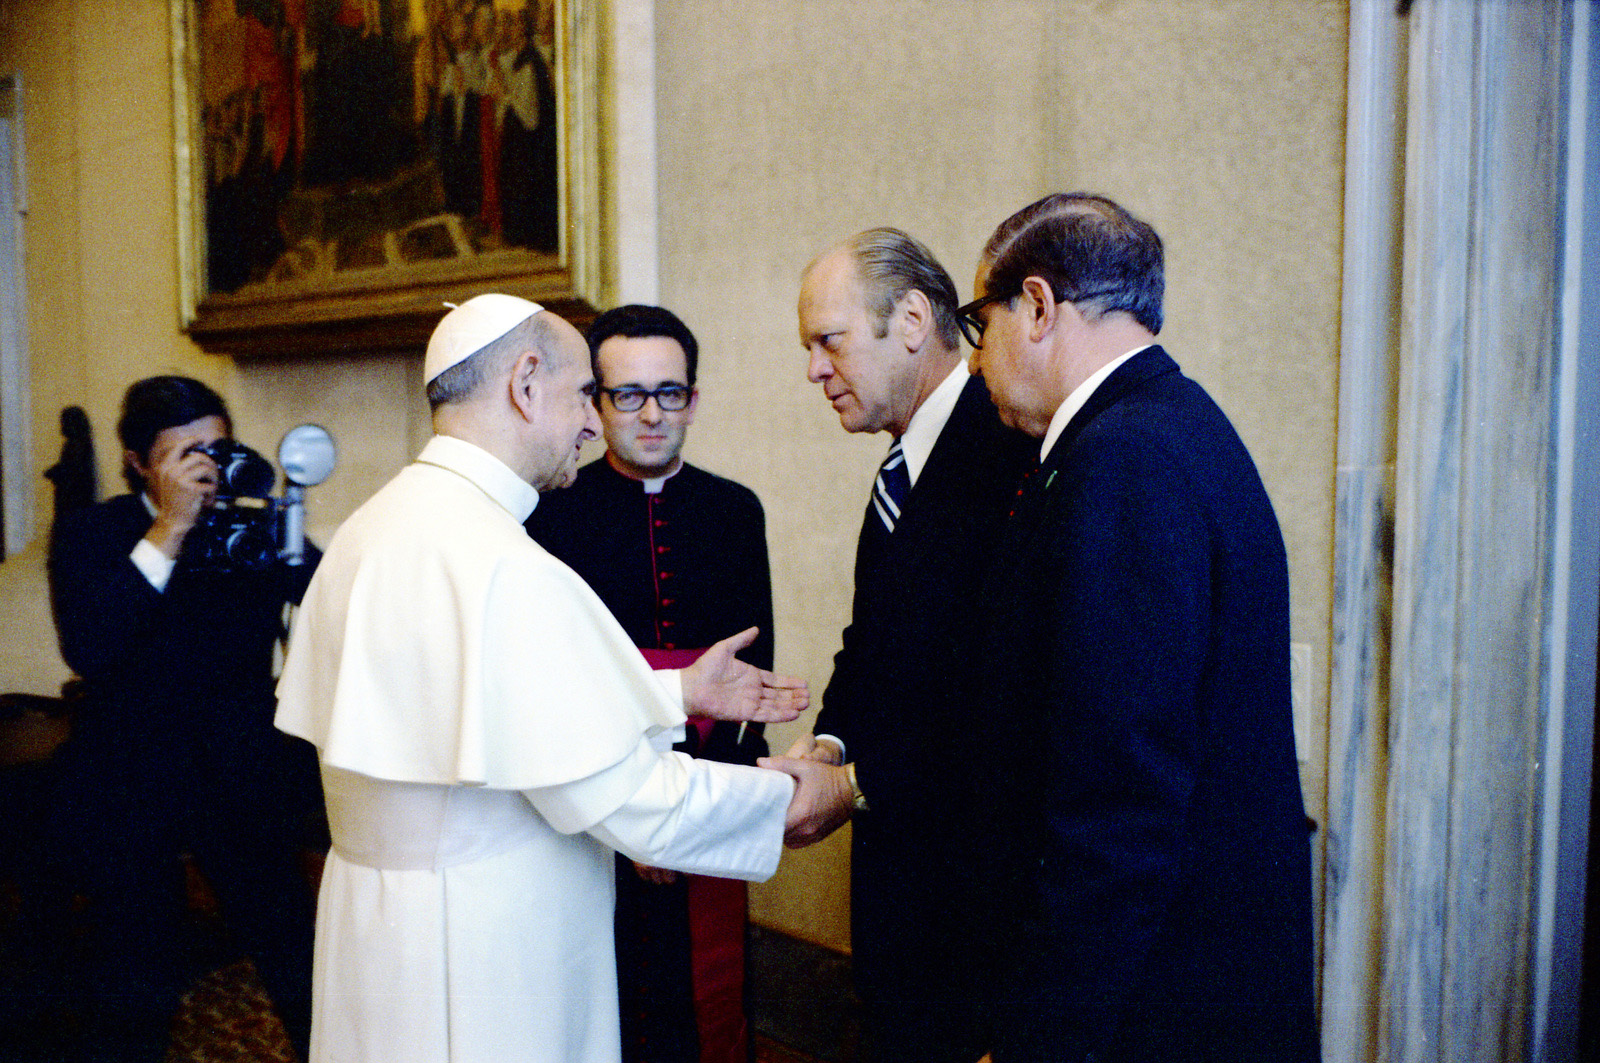 Pope Paul VI greets President Gerald Ford in the Vatican’s Papal Library on June 3, 1975. Photo courtesy Gerald R. Ford Library/Creative Commons